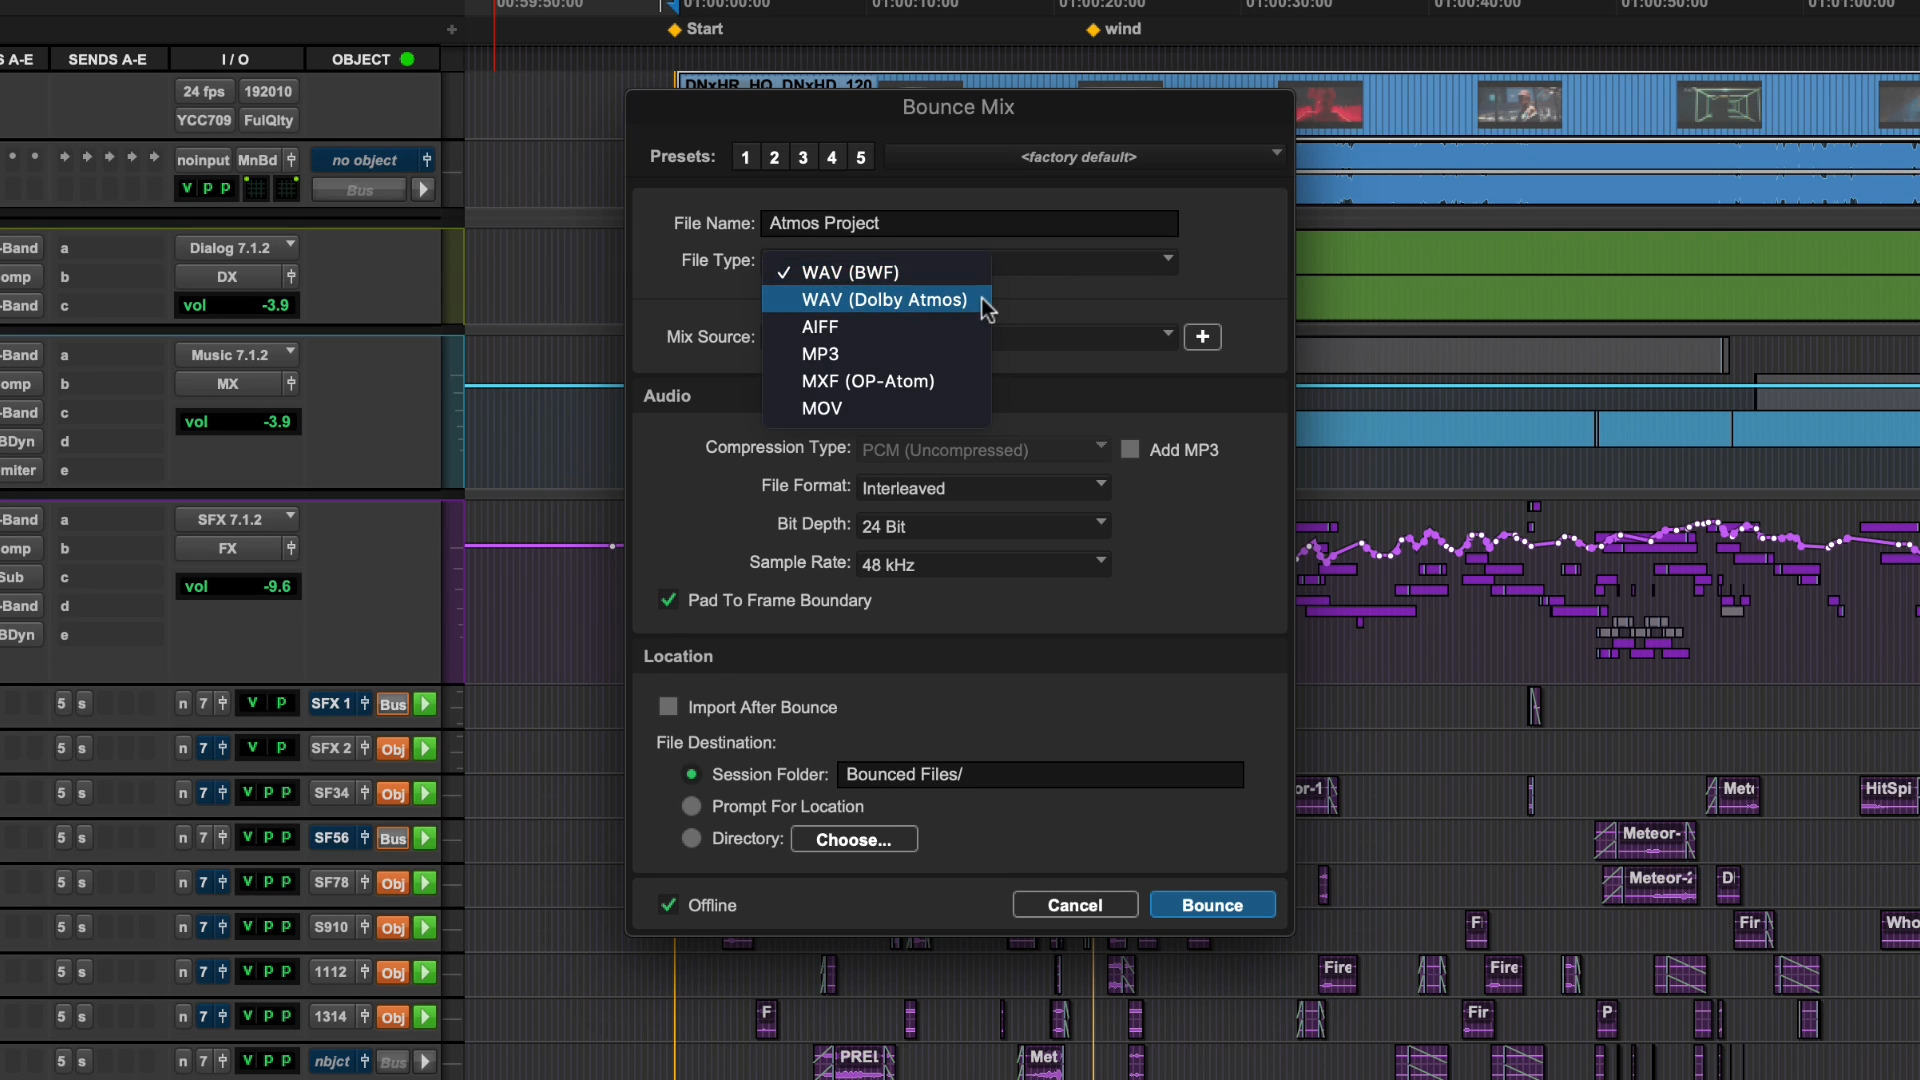 New in Pro Tools, digital audio workstation, software, Learn how to use  the new track markers in Pro Tools to improve sound workflows and audio  post production collaborations ▶️ youtu.be/FcLtOCu3v4U